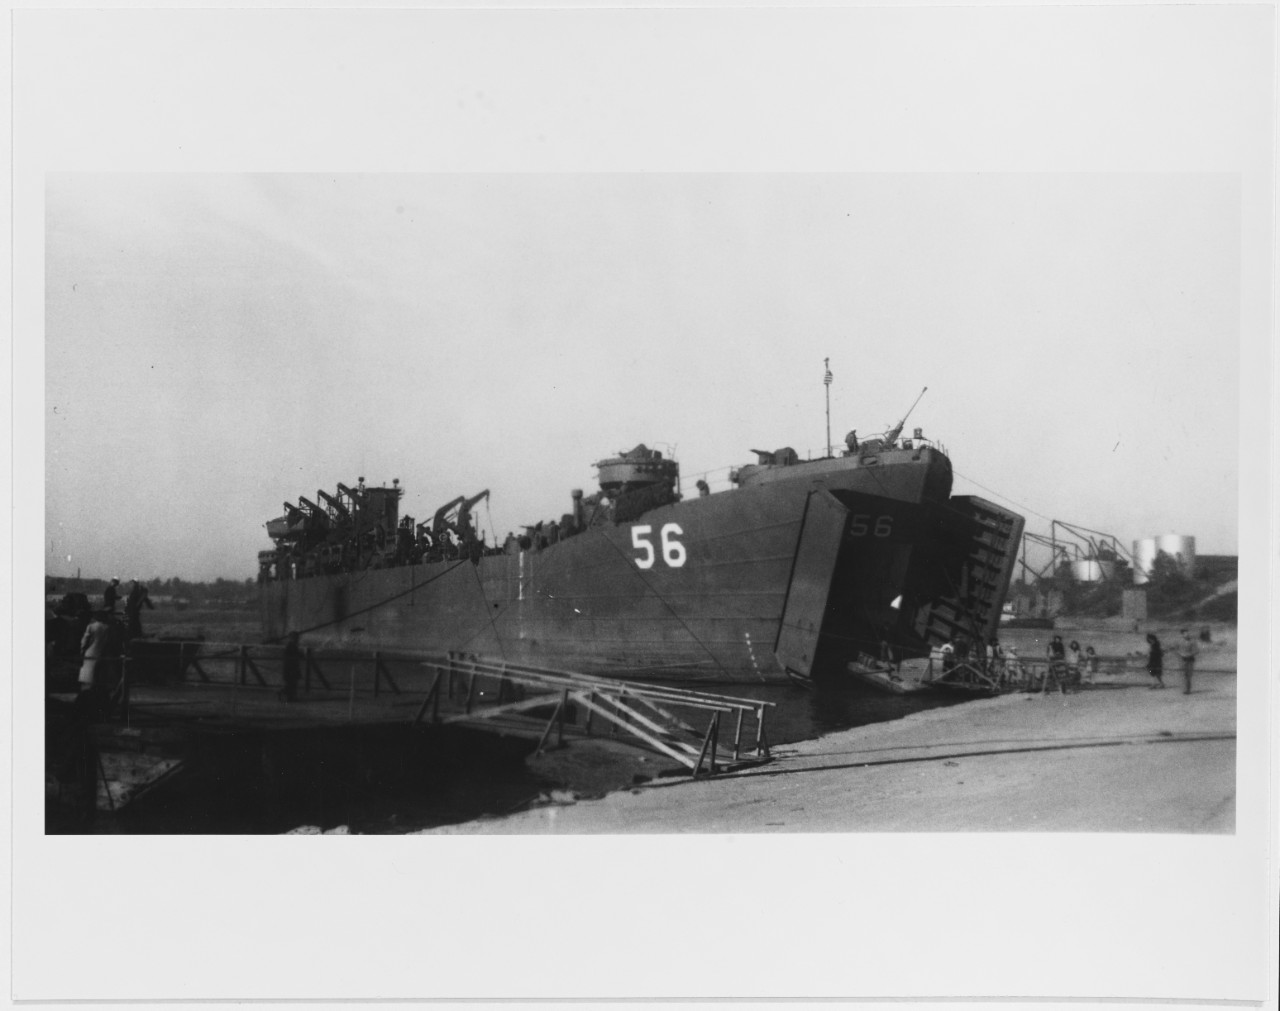 USS LST-56 at Evansville, Indiana, on October 25-30, 1945